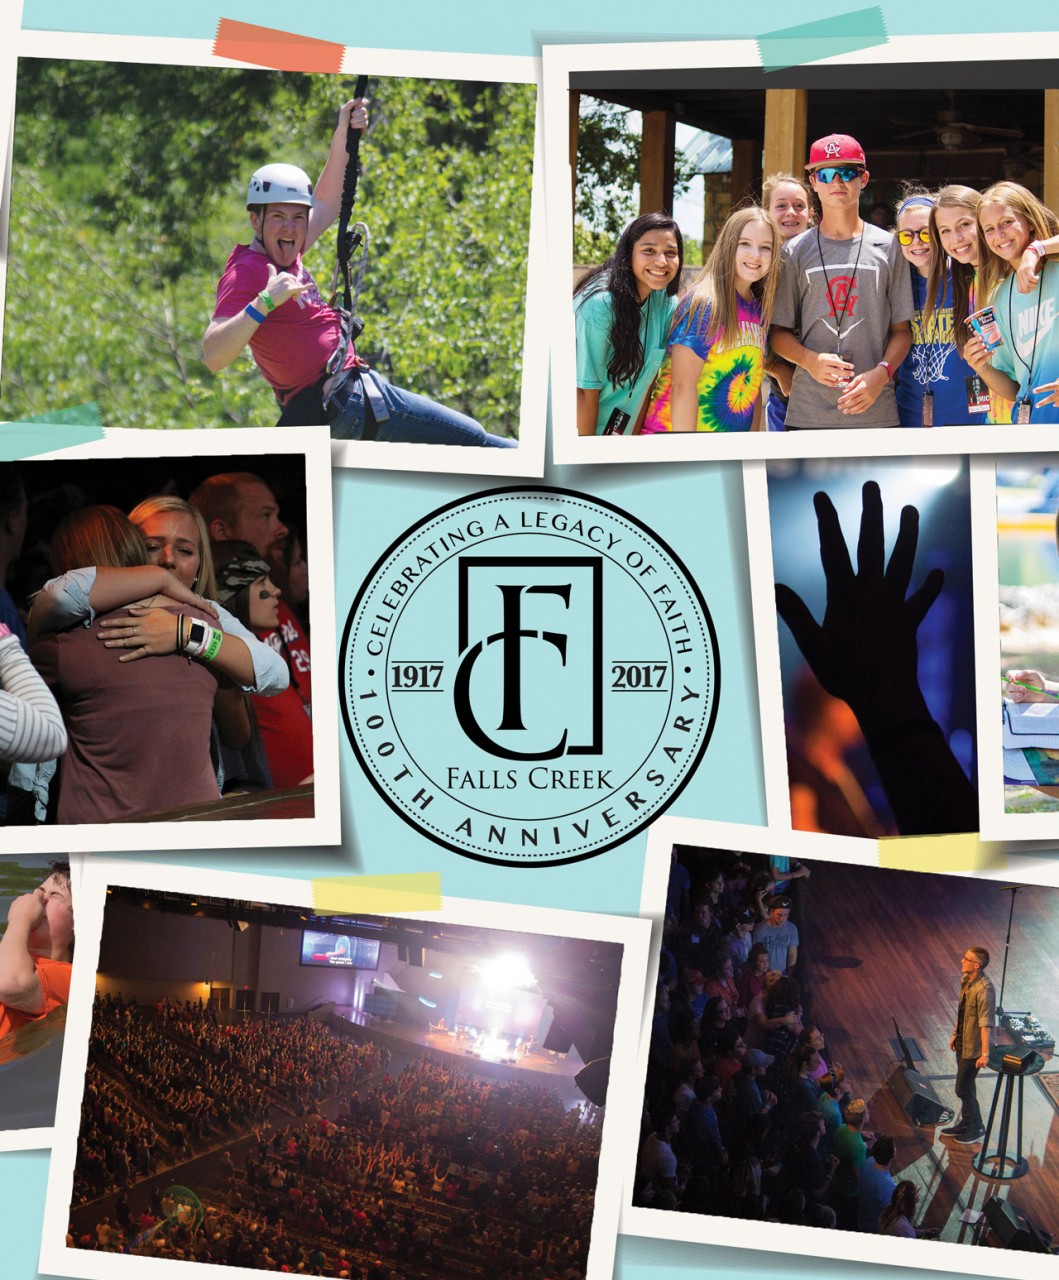 Falls Creek’s faithful: Record-high professions of faith observed at 100th year of camp